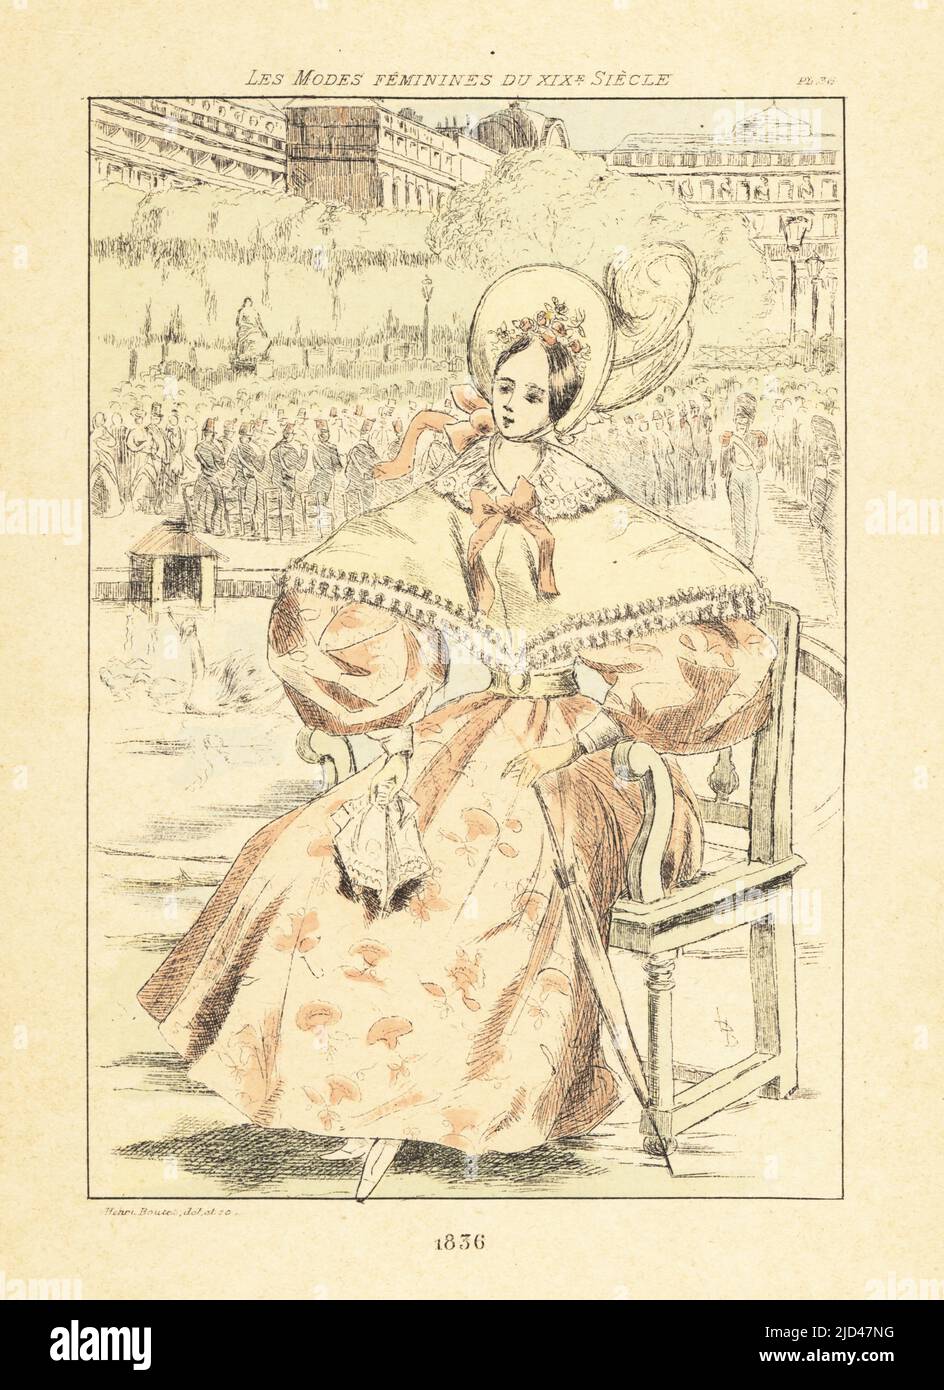 Fashionable woman sitting in a park, while a military band plays music, Paris, 1836. She wears a bonnet, dress with full sleeves, lace capelet and holds a handkerchief and parasol. Handcoloured drypoint or pointe-seche etching by Henri Boutet from Les Modes Feminines du XIXeme Siecle (Female Fashions of the 19th Century), Ernest Flammarion, Paris, 1902. Boutet (1851-1919) was a French artist, engraver, lithographer and designer. Stock Photo